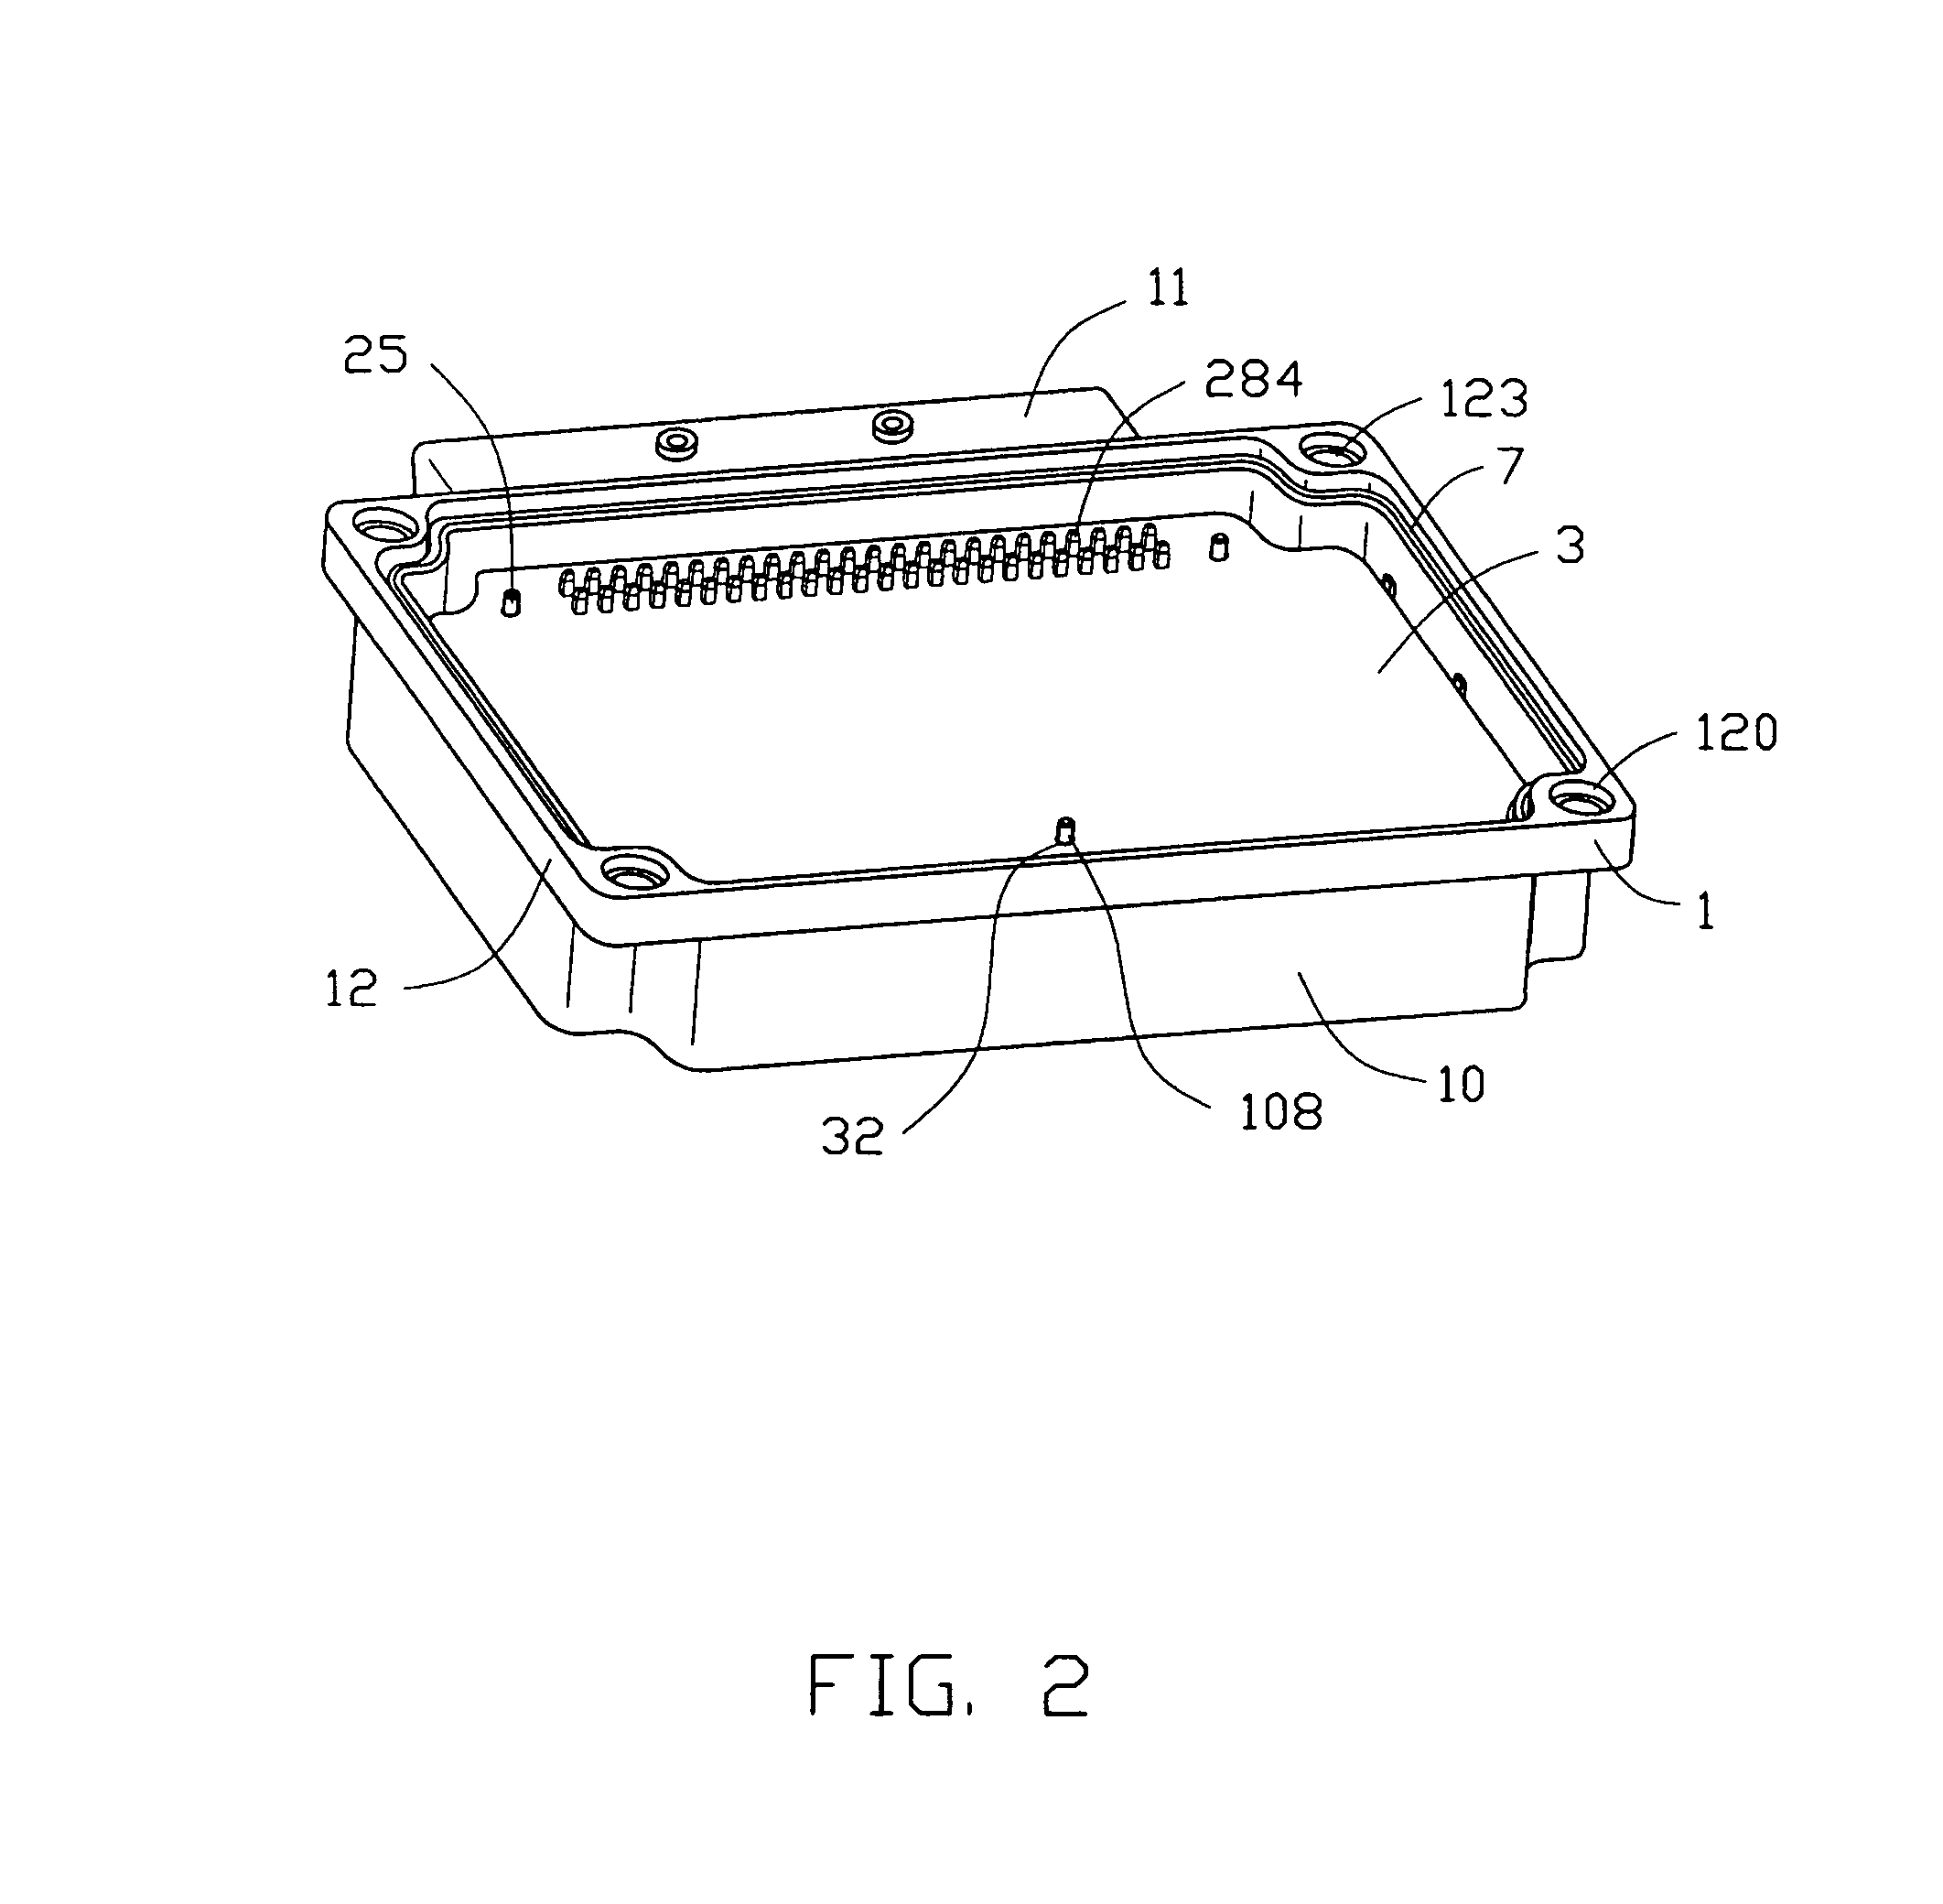 Transmission module assembly having printed circuit board